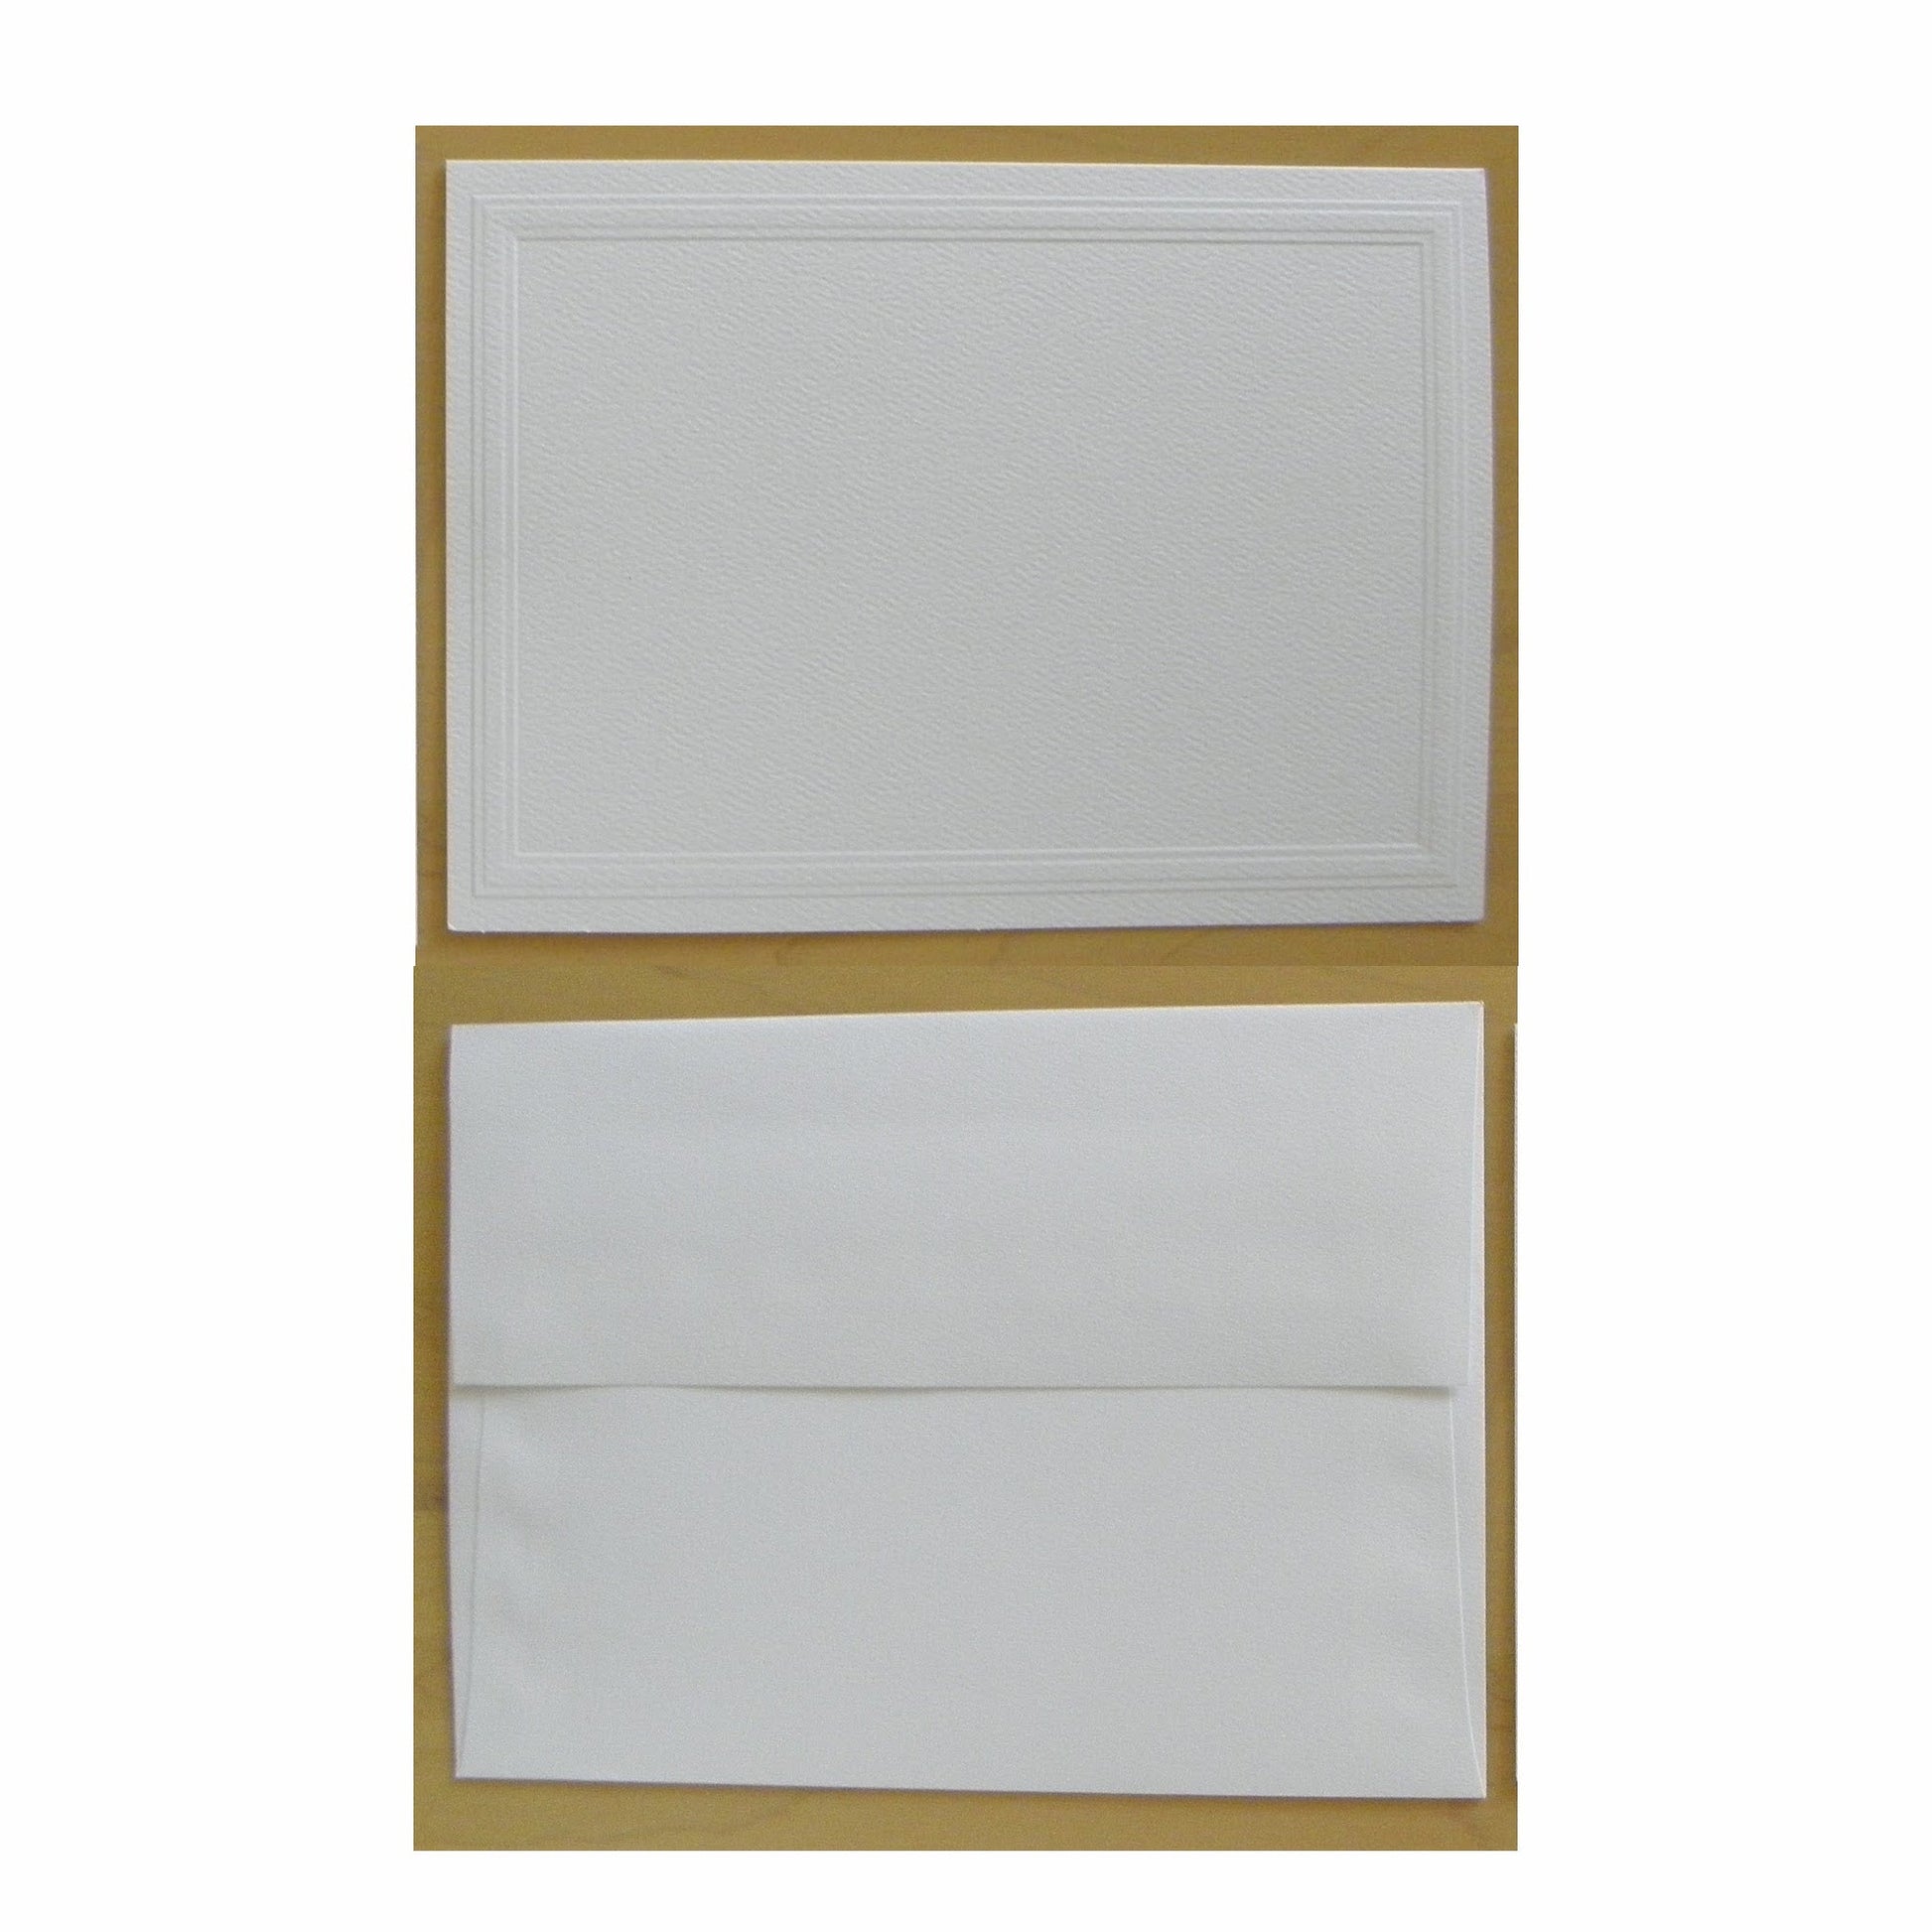 Photograph of the deluxe embossed Classic card stock with coordinating envelope